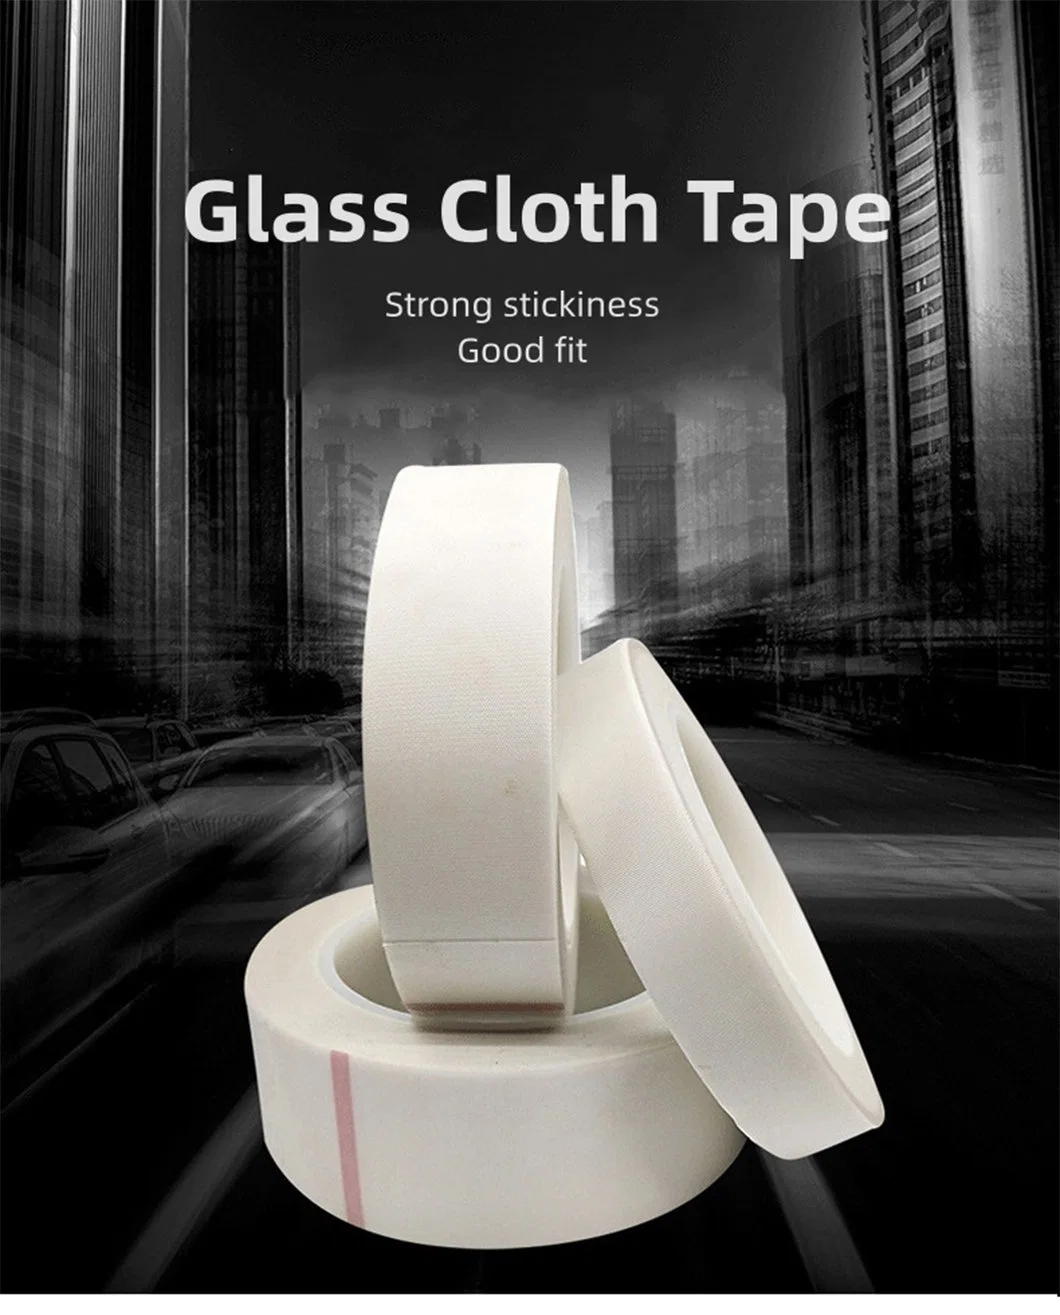 Reliable Holding Power Fiber Glass Filament Tape for Bundling and Reinforcing